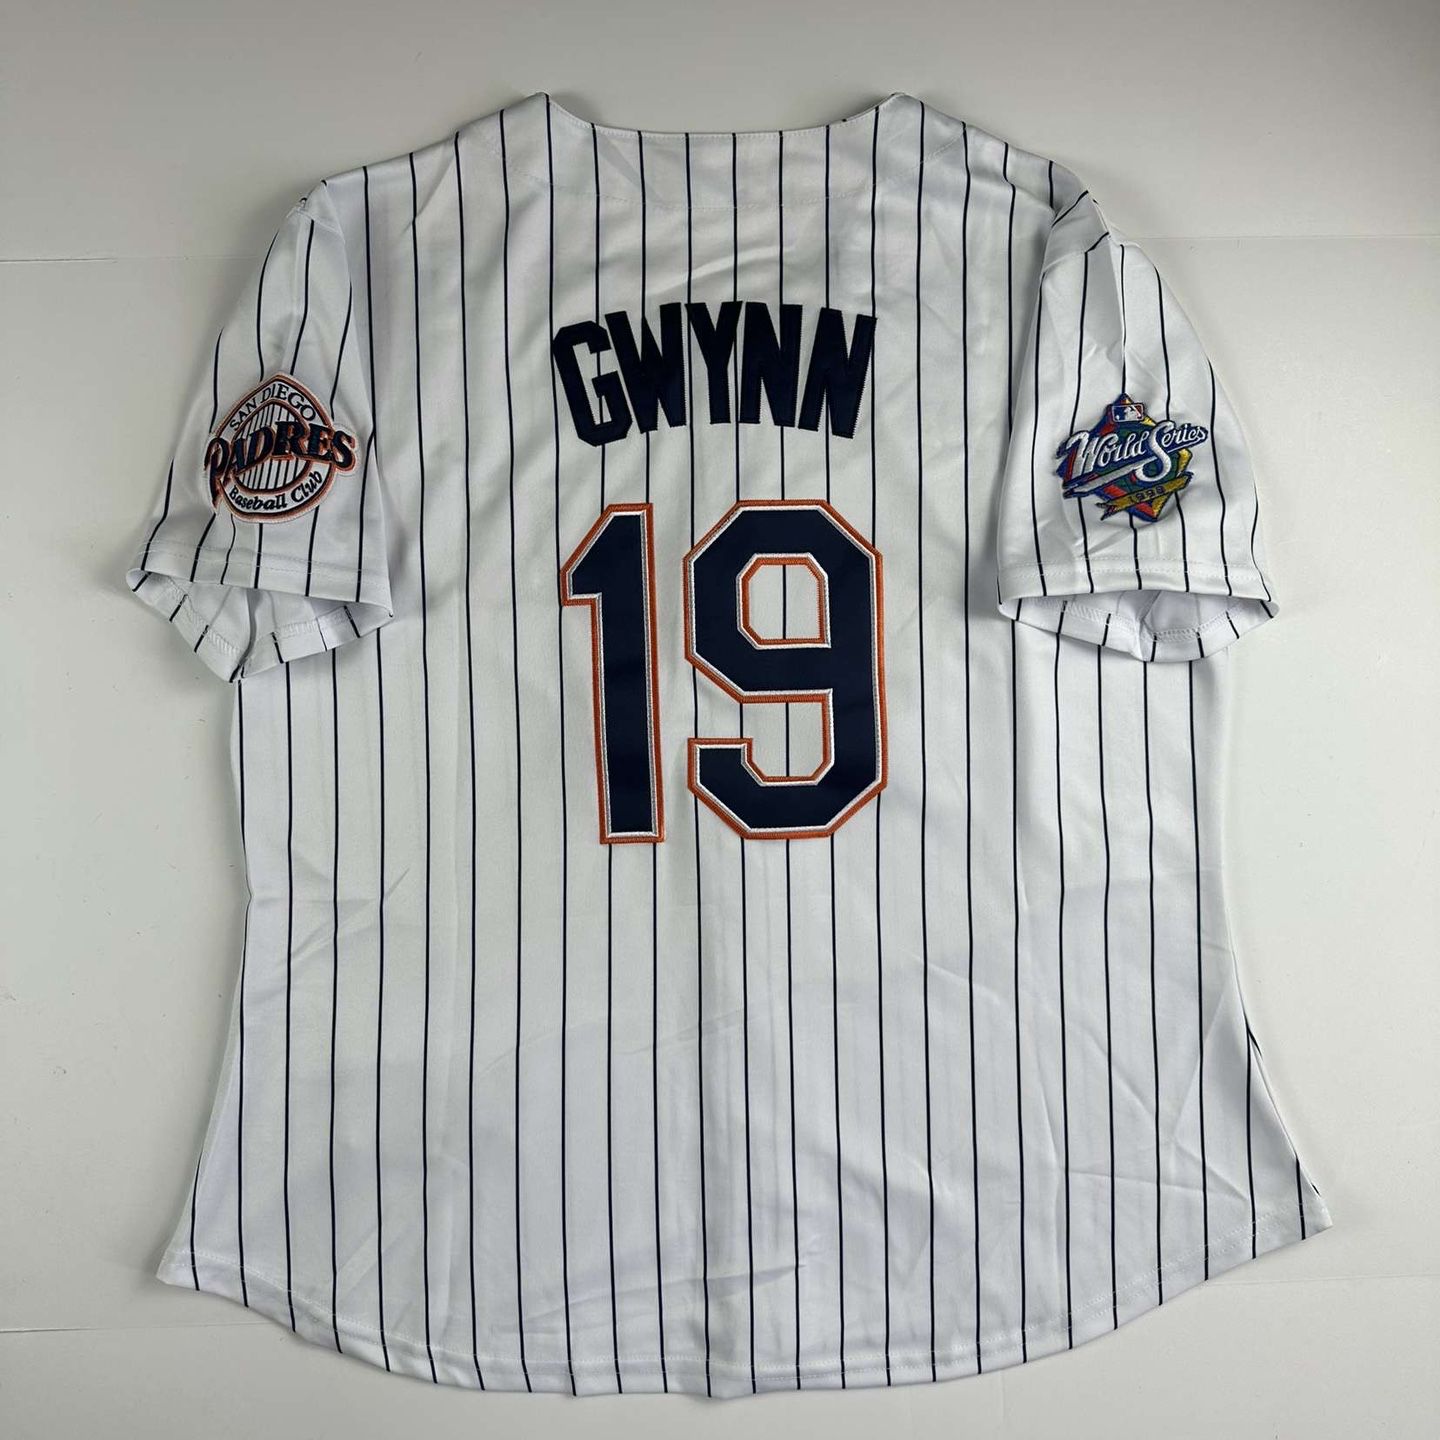 Padres City Connect Jersey for Sale in Imperial Beach, CA - OfferUp